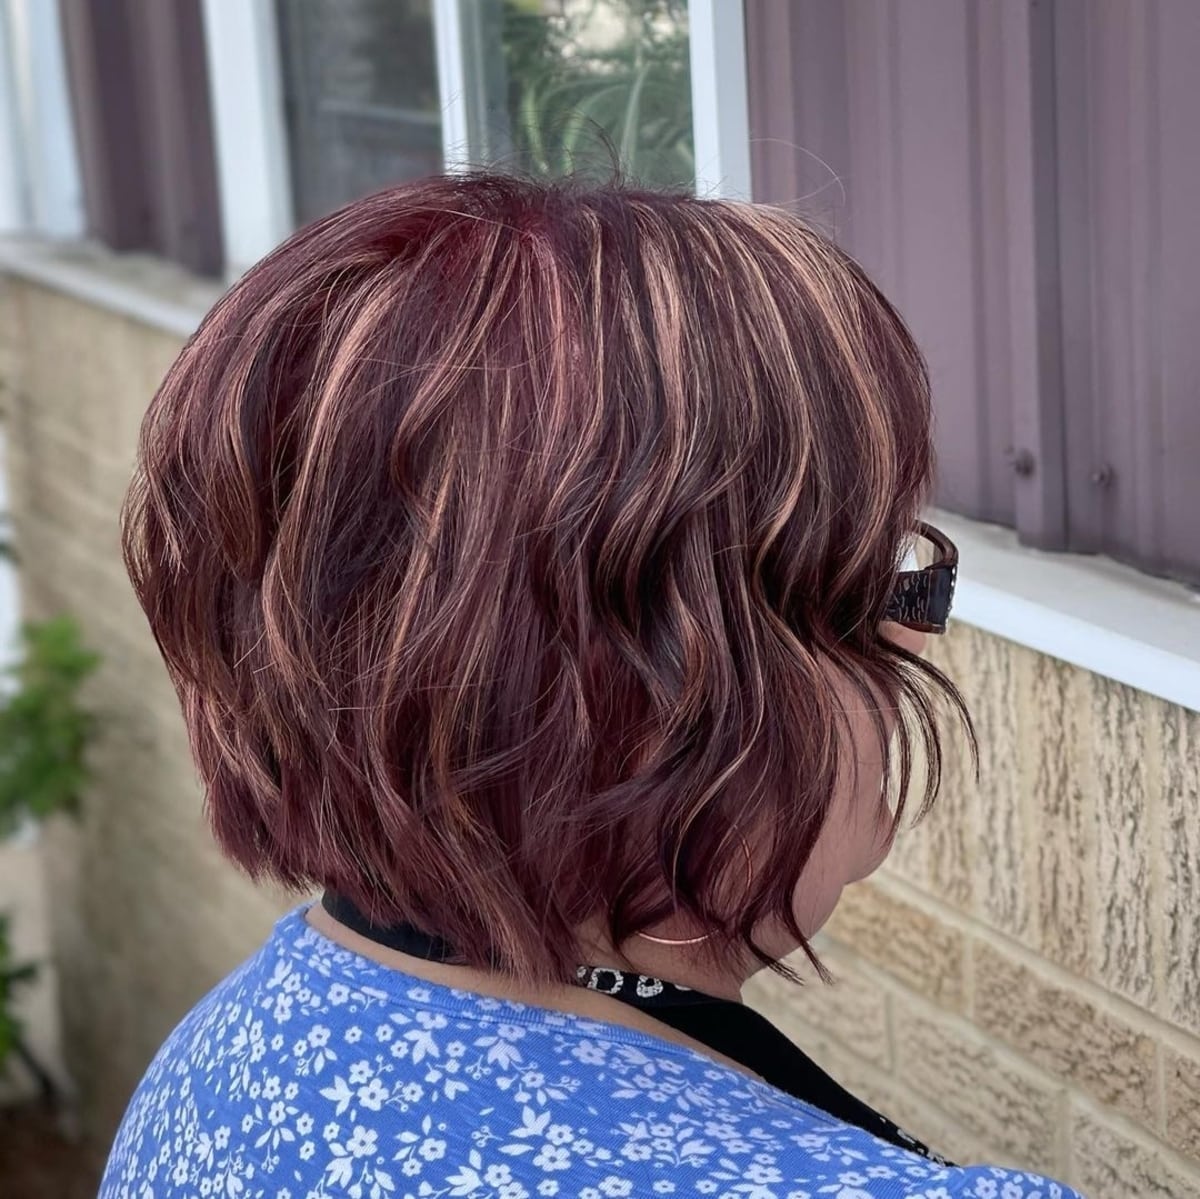 Blonde highlights in red hair for women over 50